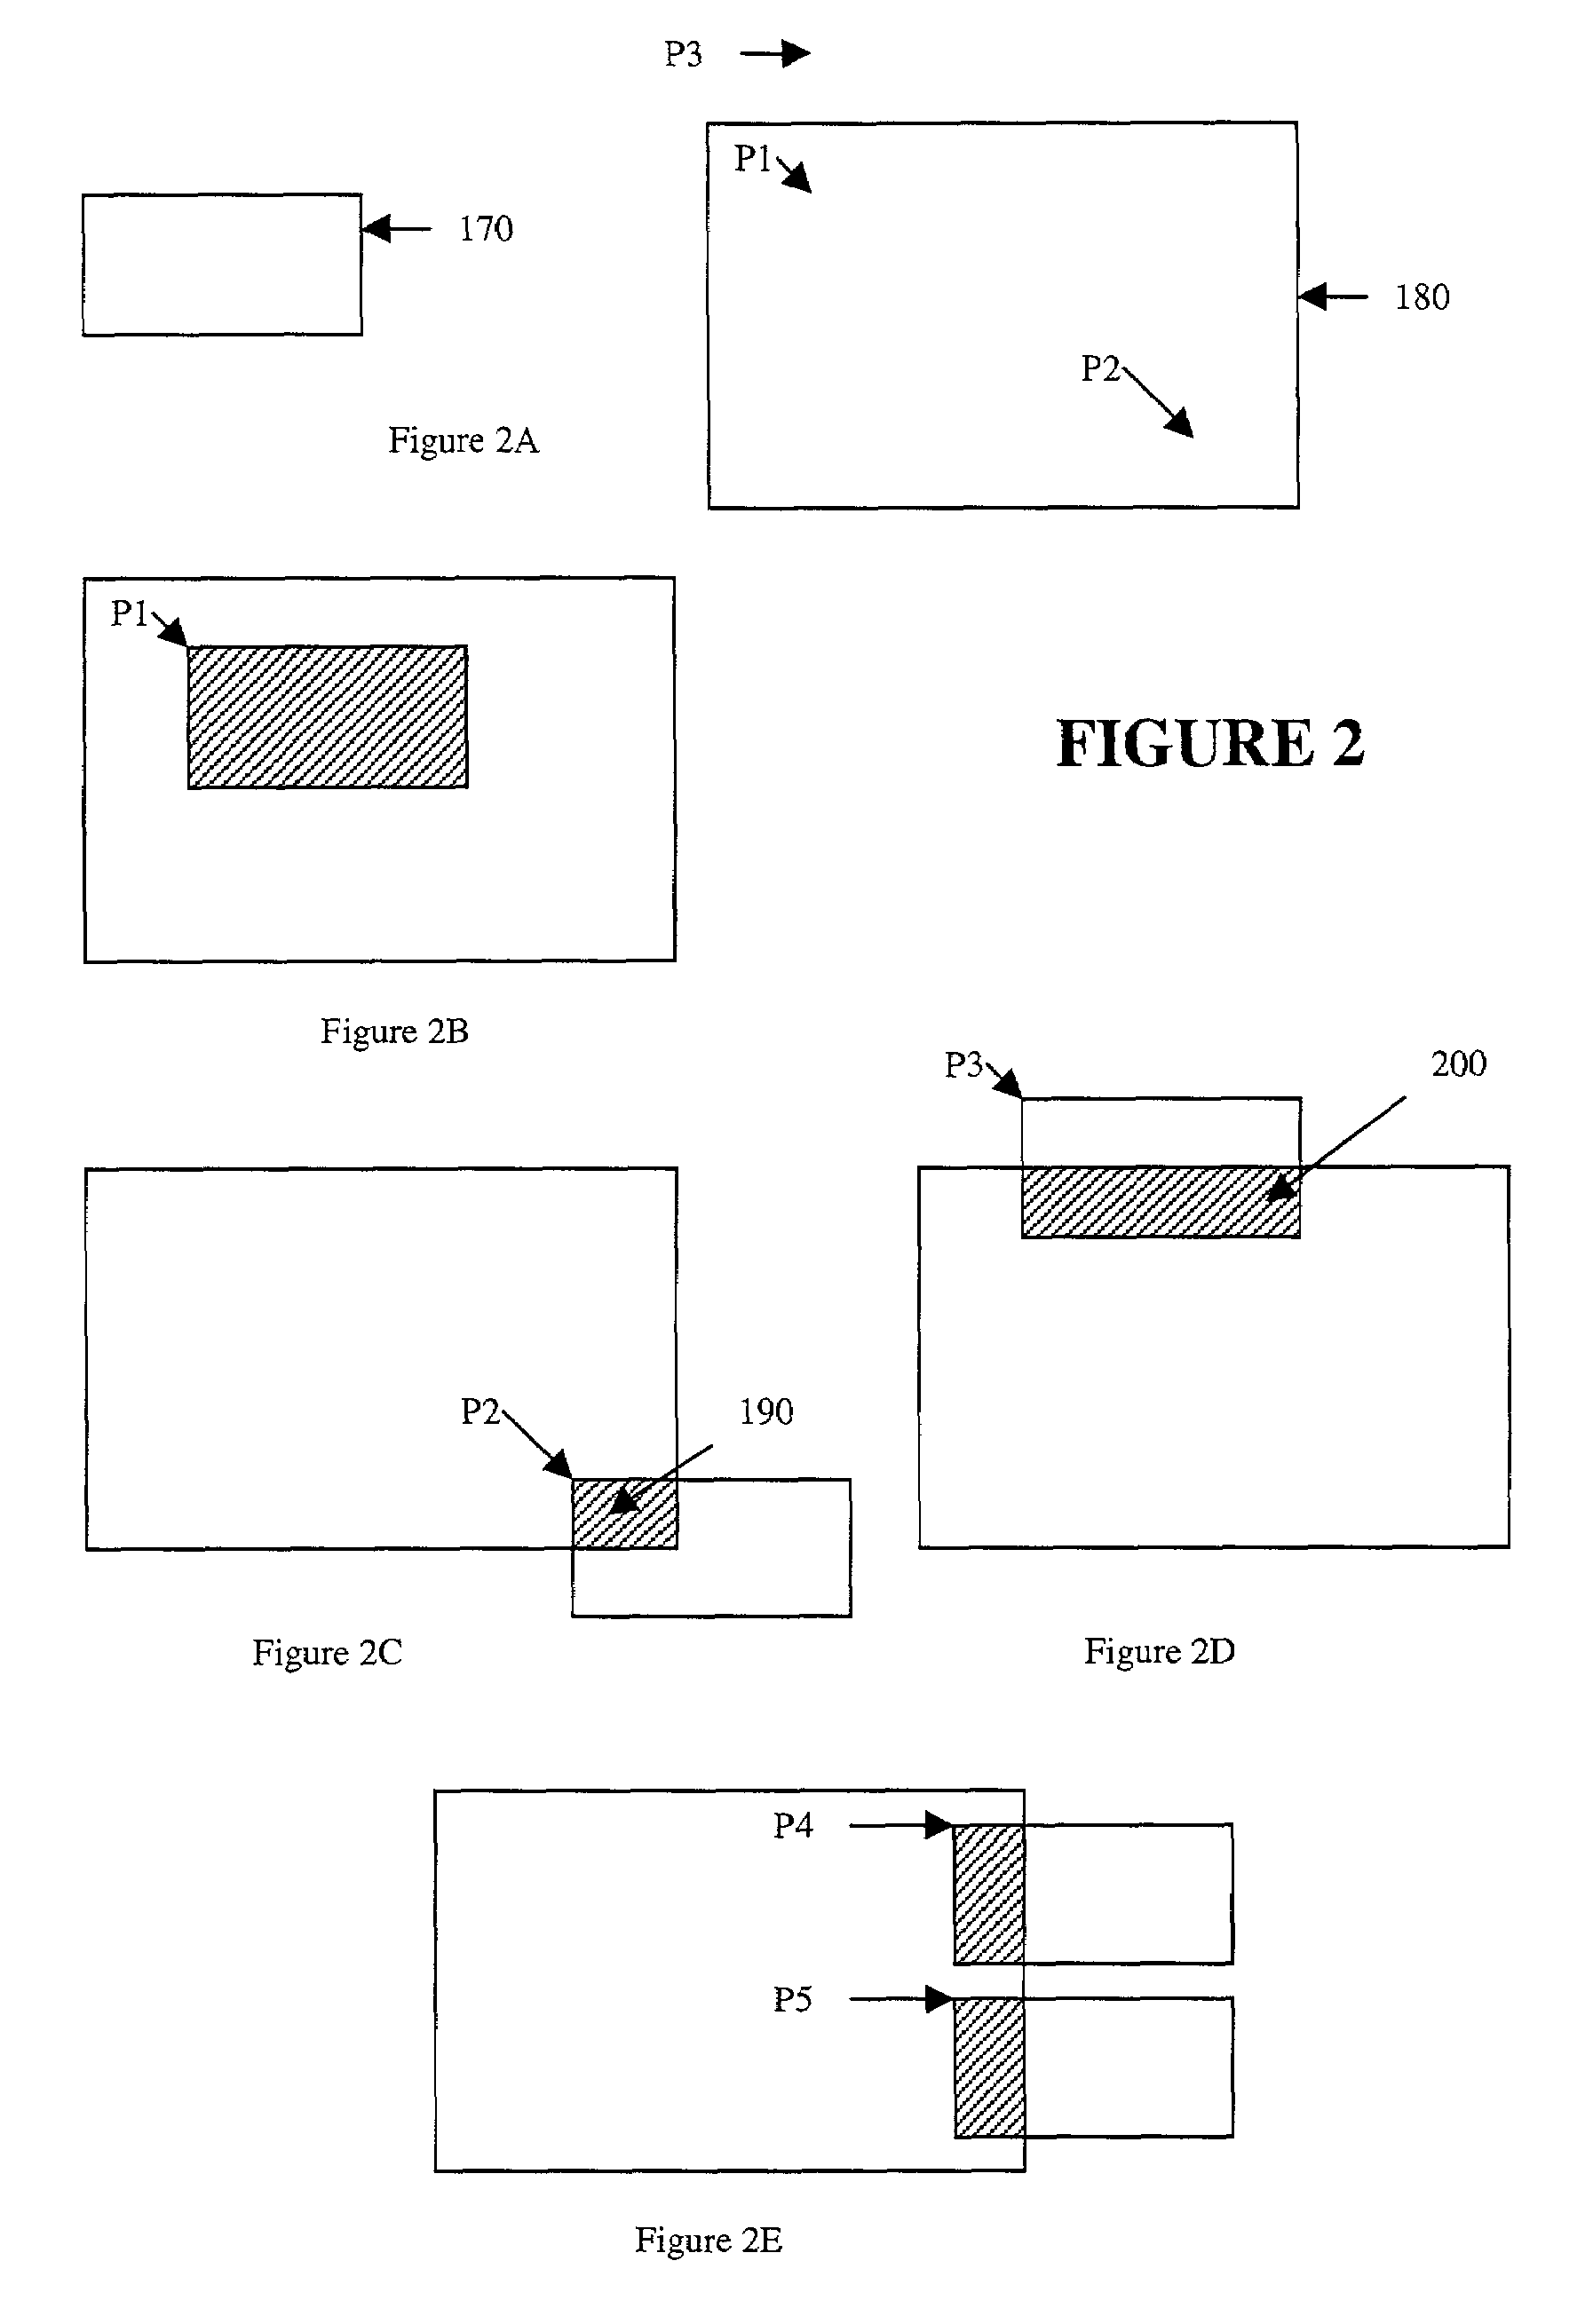 Method for finding a pattern which may fall partially outside an image